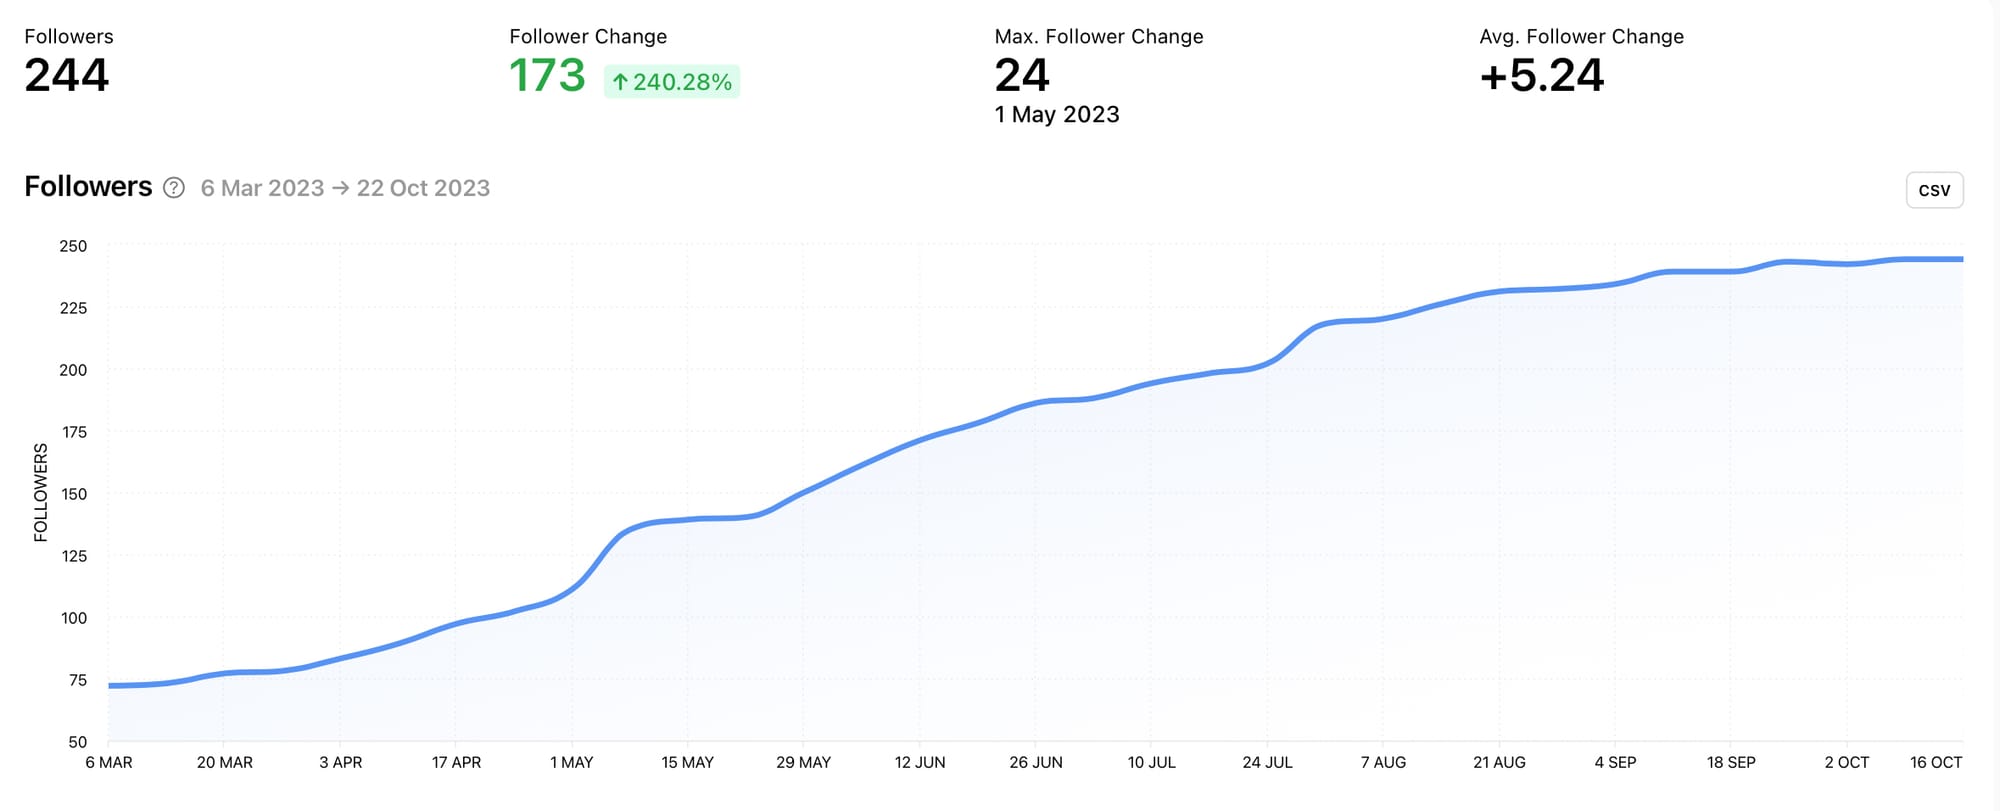 Track your TikTok follower growth or decline with the Followers graph